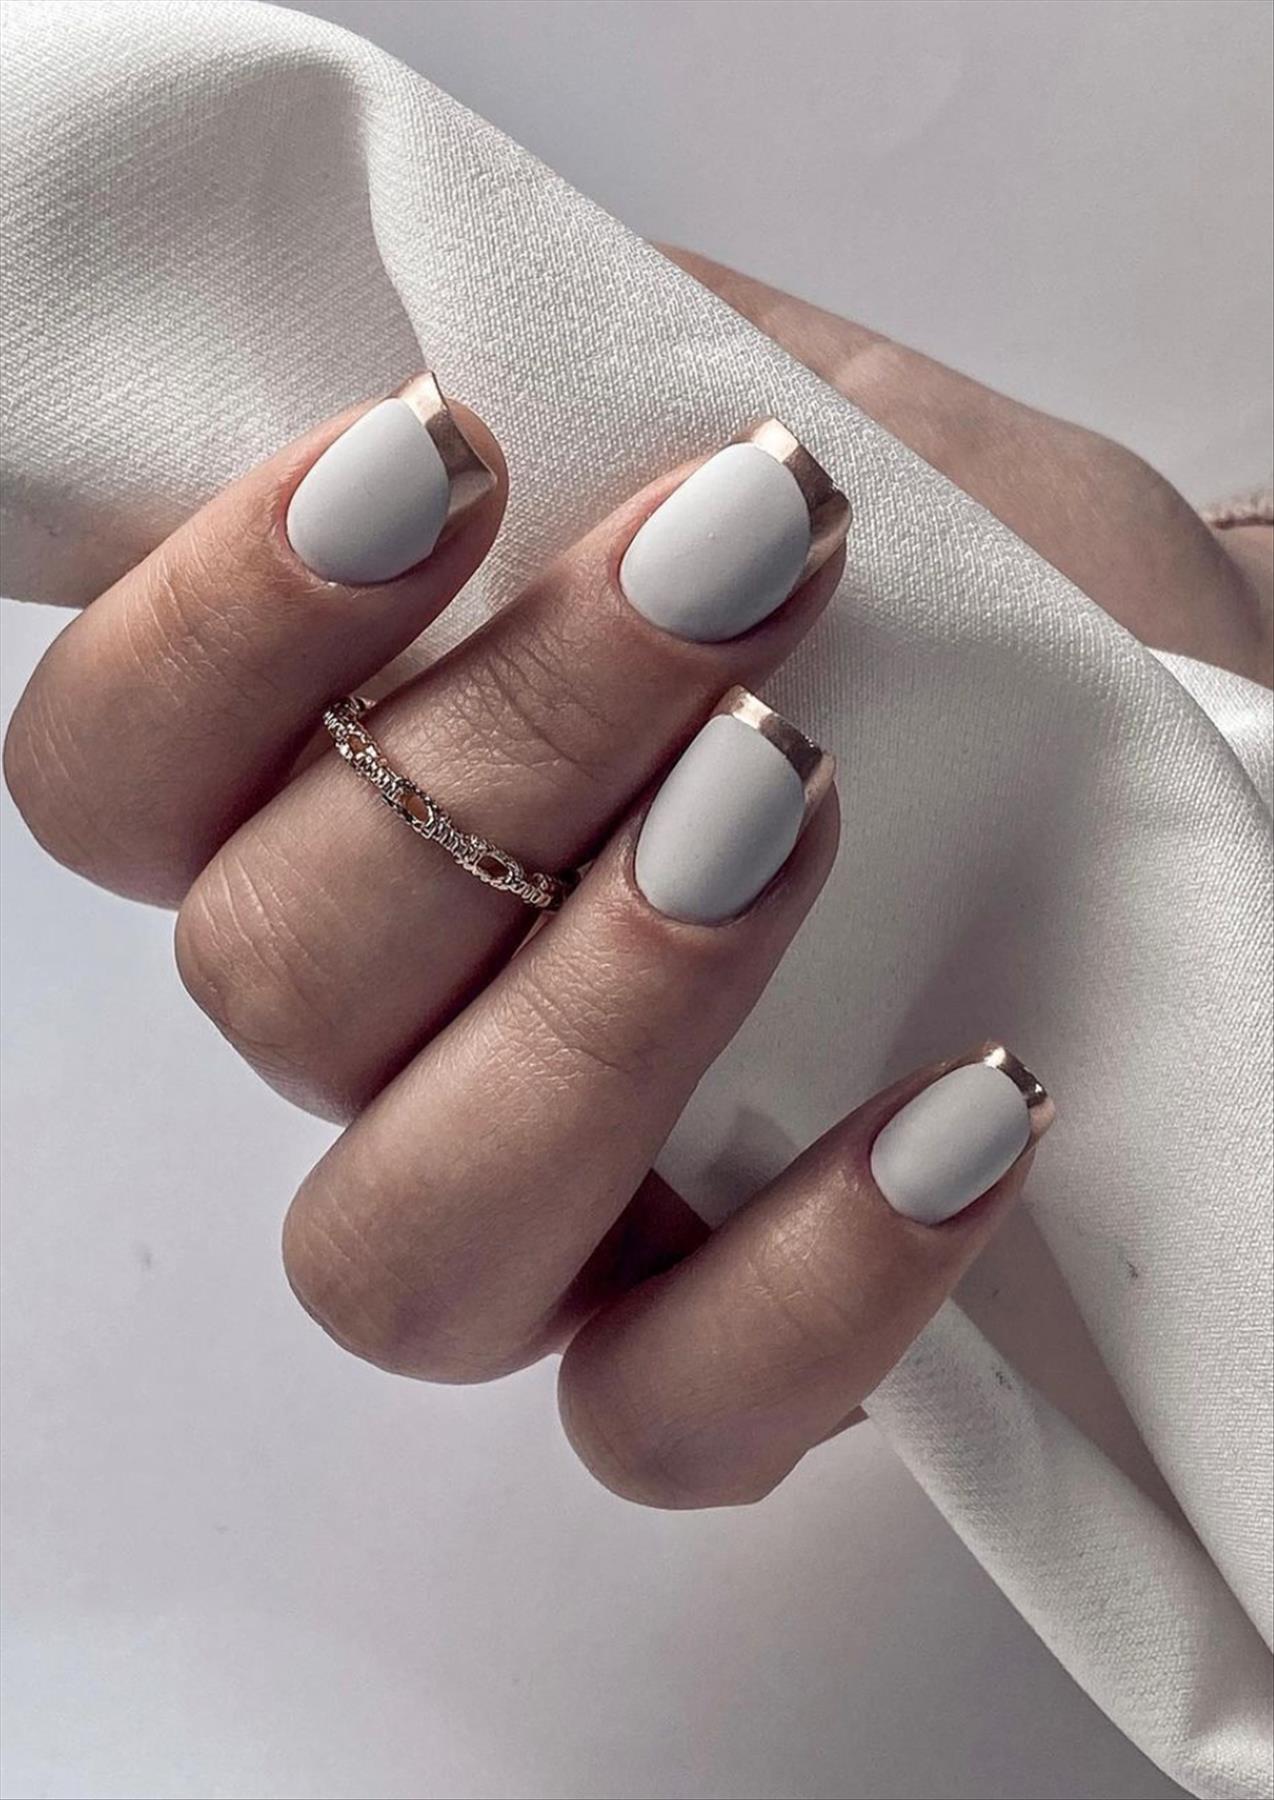 Best summer acrylic nails 2022 inspiration to try